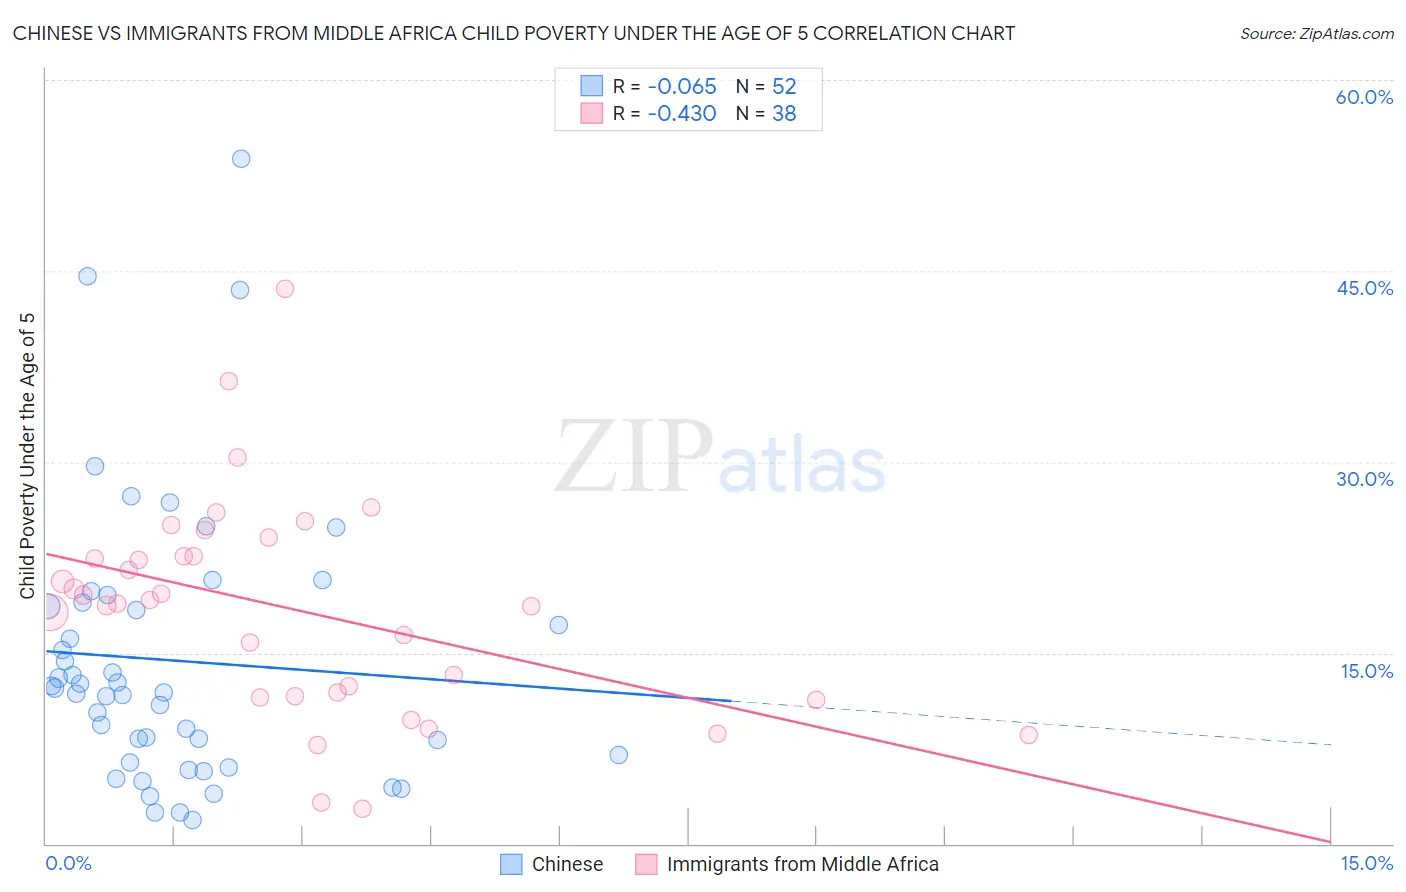 Chinese vs Immigrants from Middle Africa Child Poverty Under the Age of 5